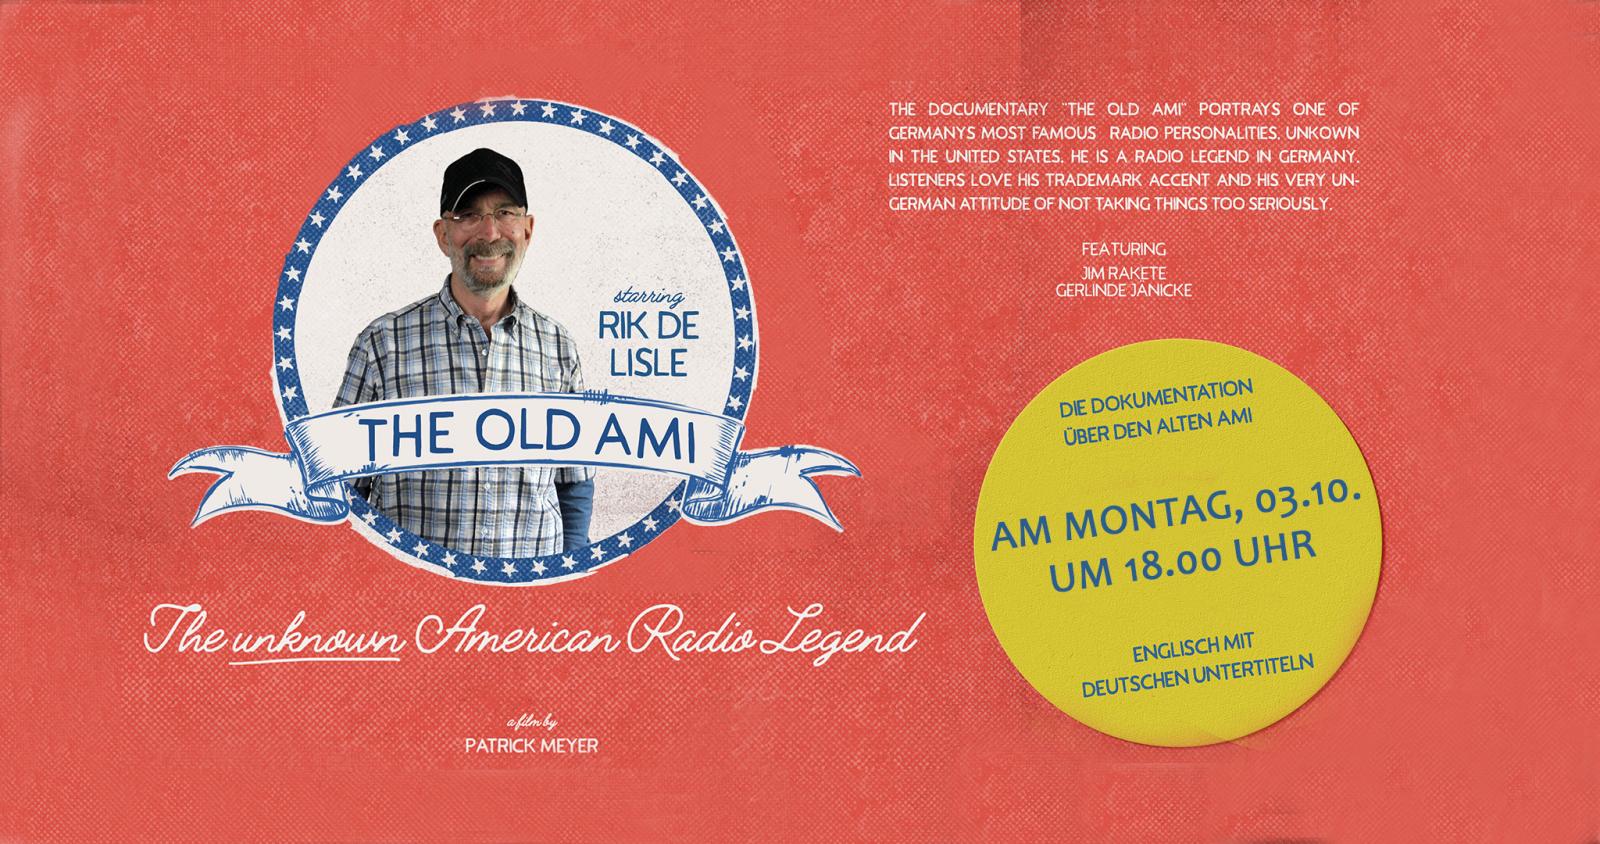 THE OLD AMI - THE UNKNOWN AMERICAN RADIO LEGEND